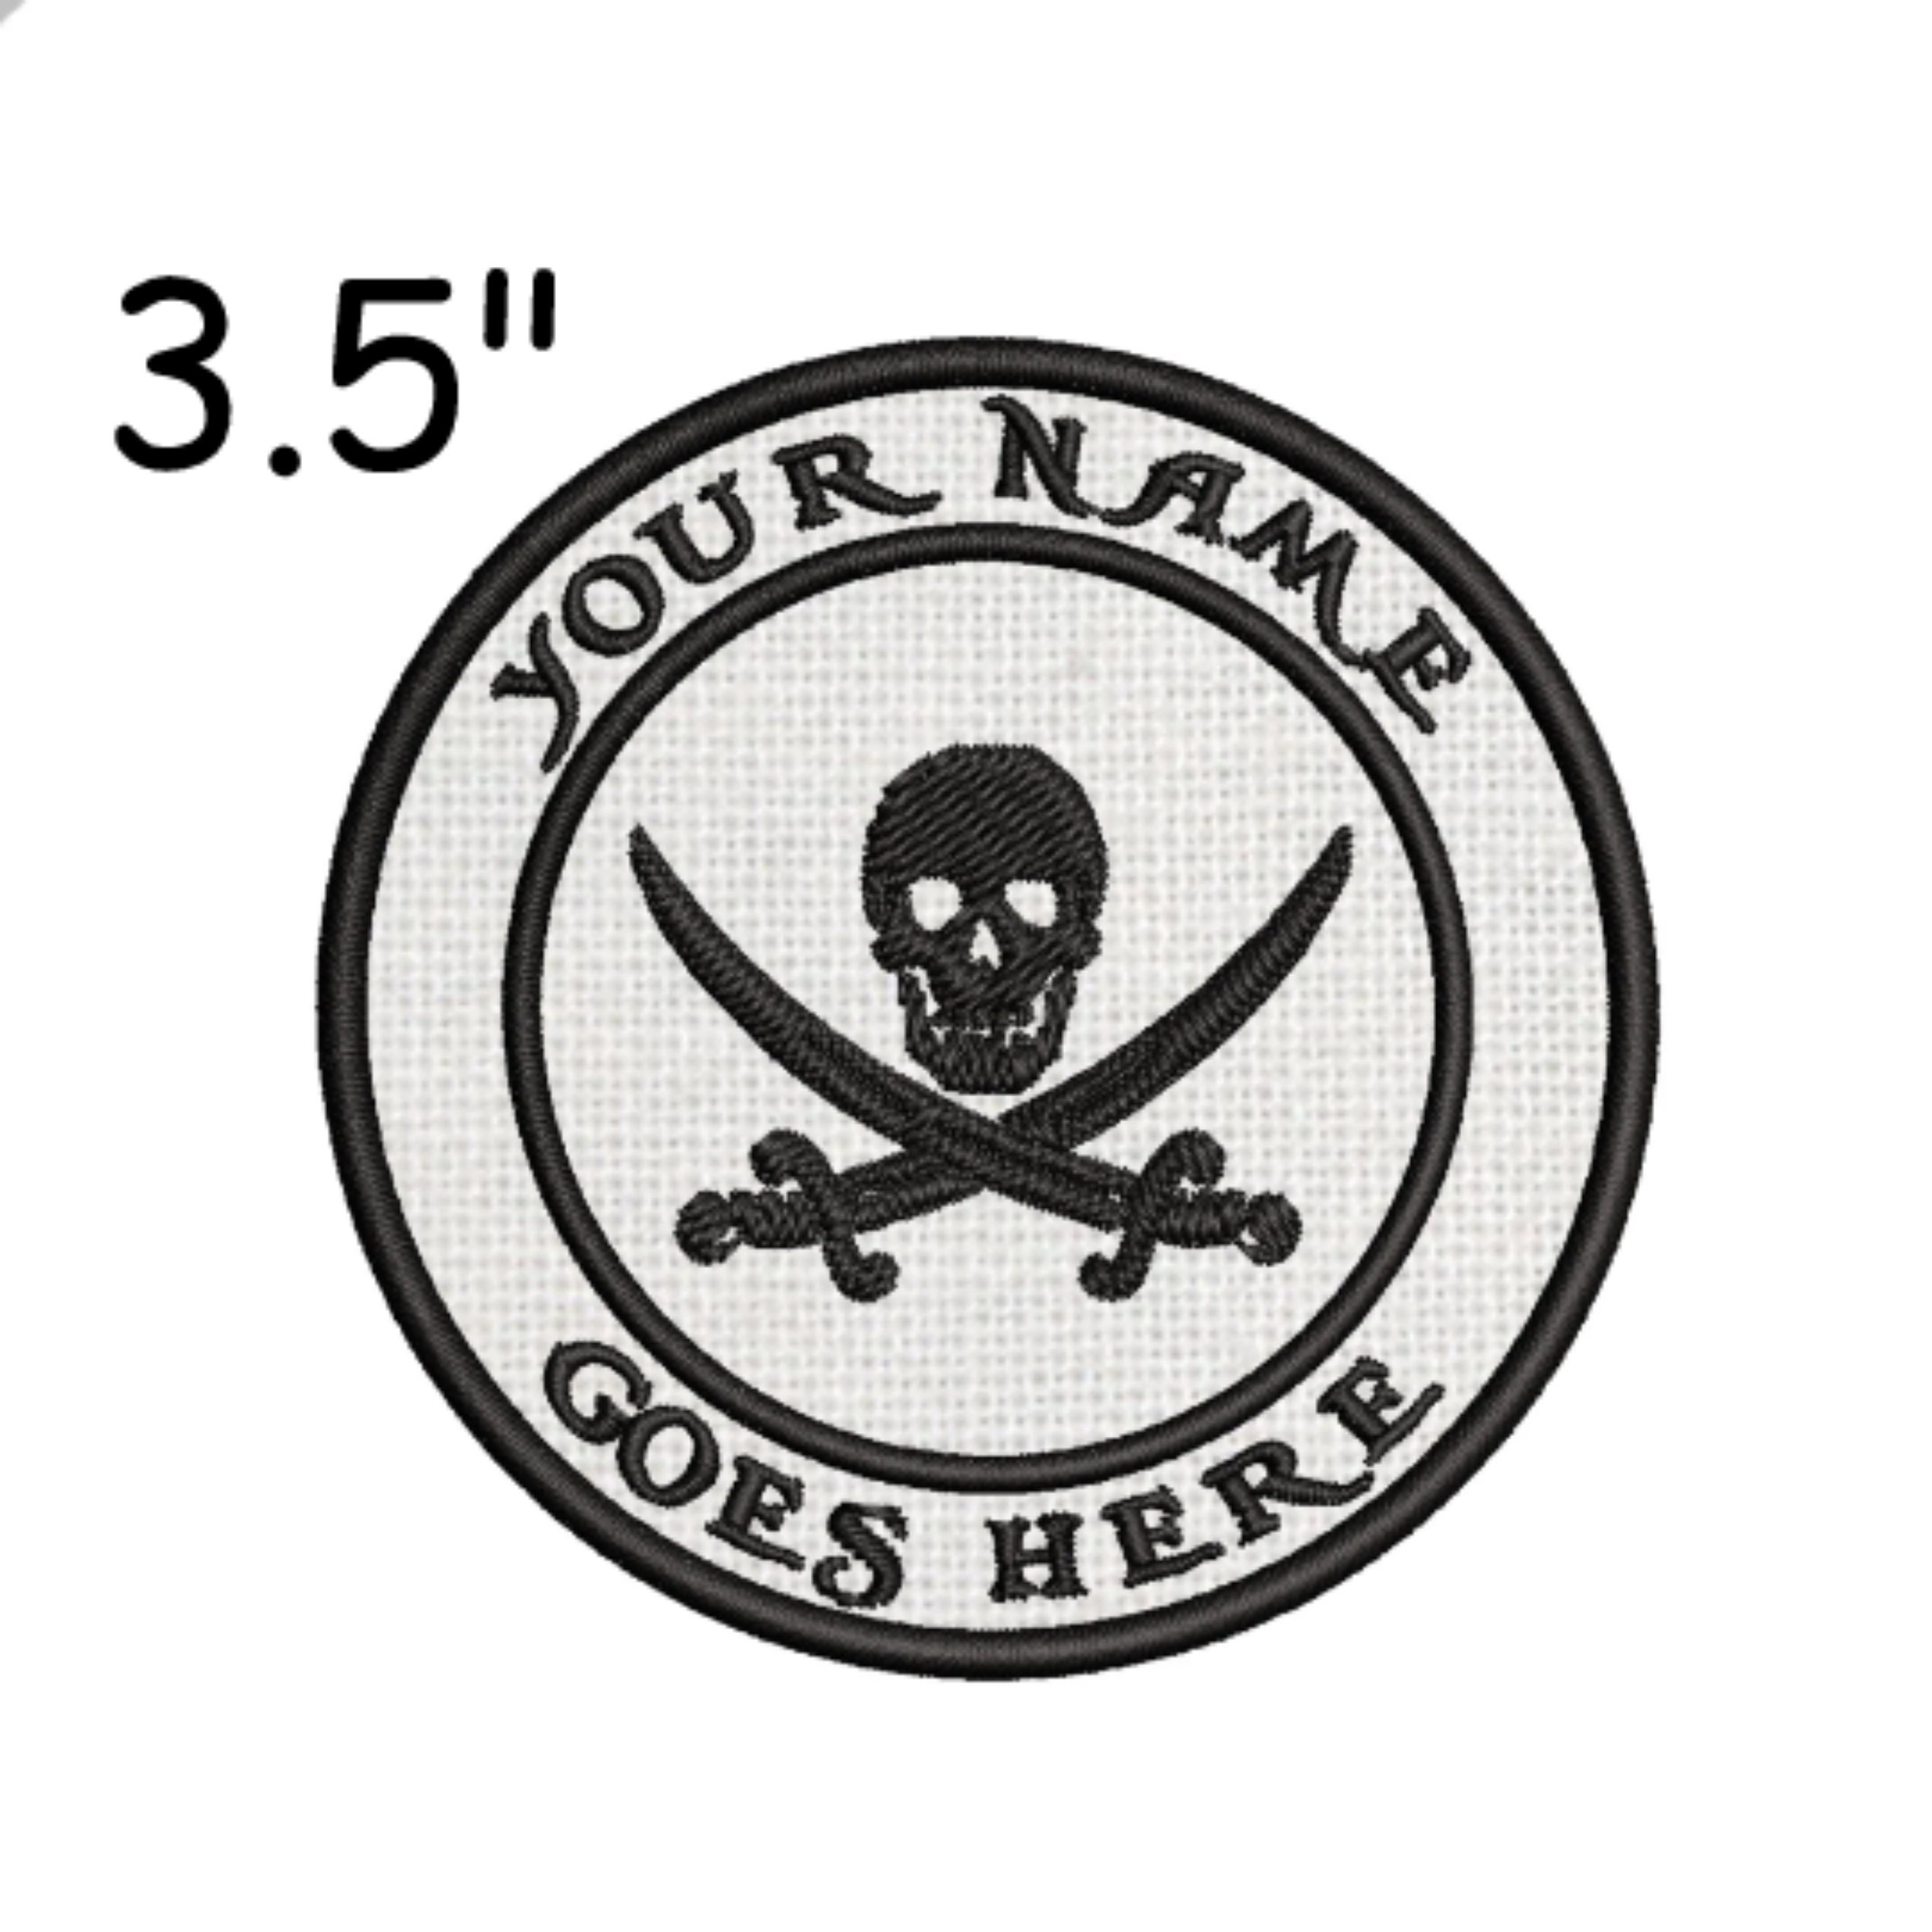 Cool Embroidered MC Devil, Army, CAMPBELL, RIVER Patch For Motorcycle Club  Vest, Outlaw, Biker, Royal Enfield Jackets Iron On Large Back Patch From  Jonnaean, $40.21